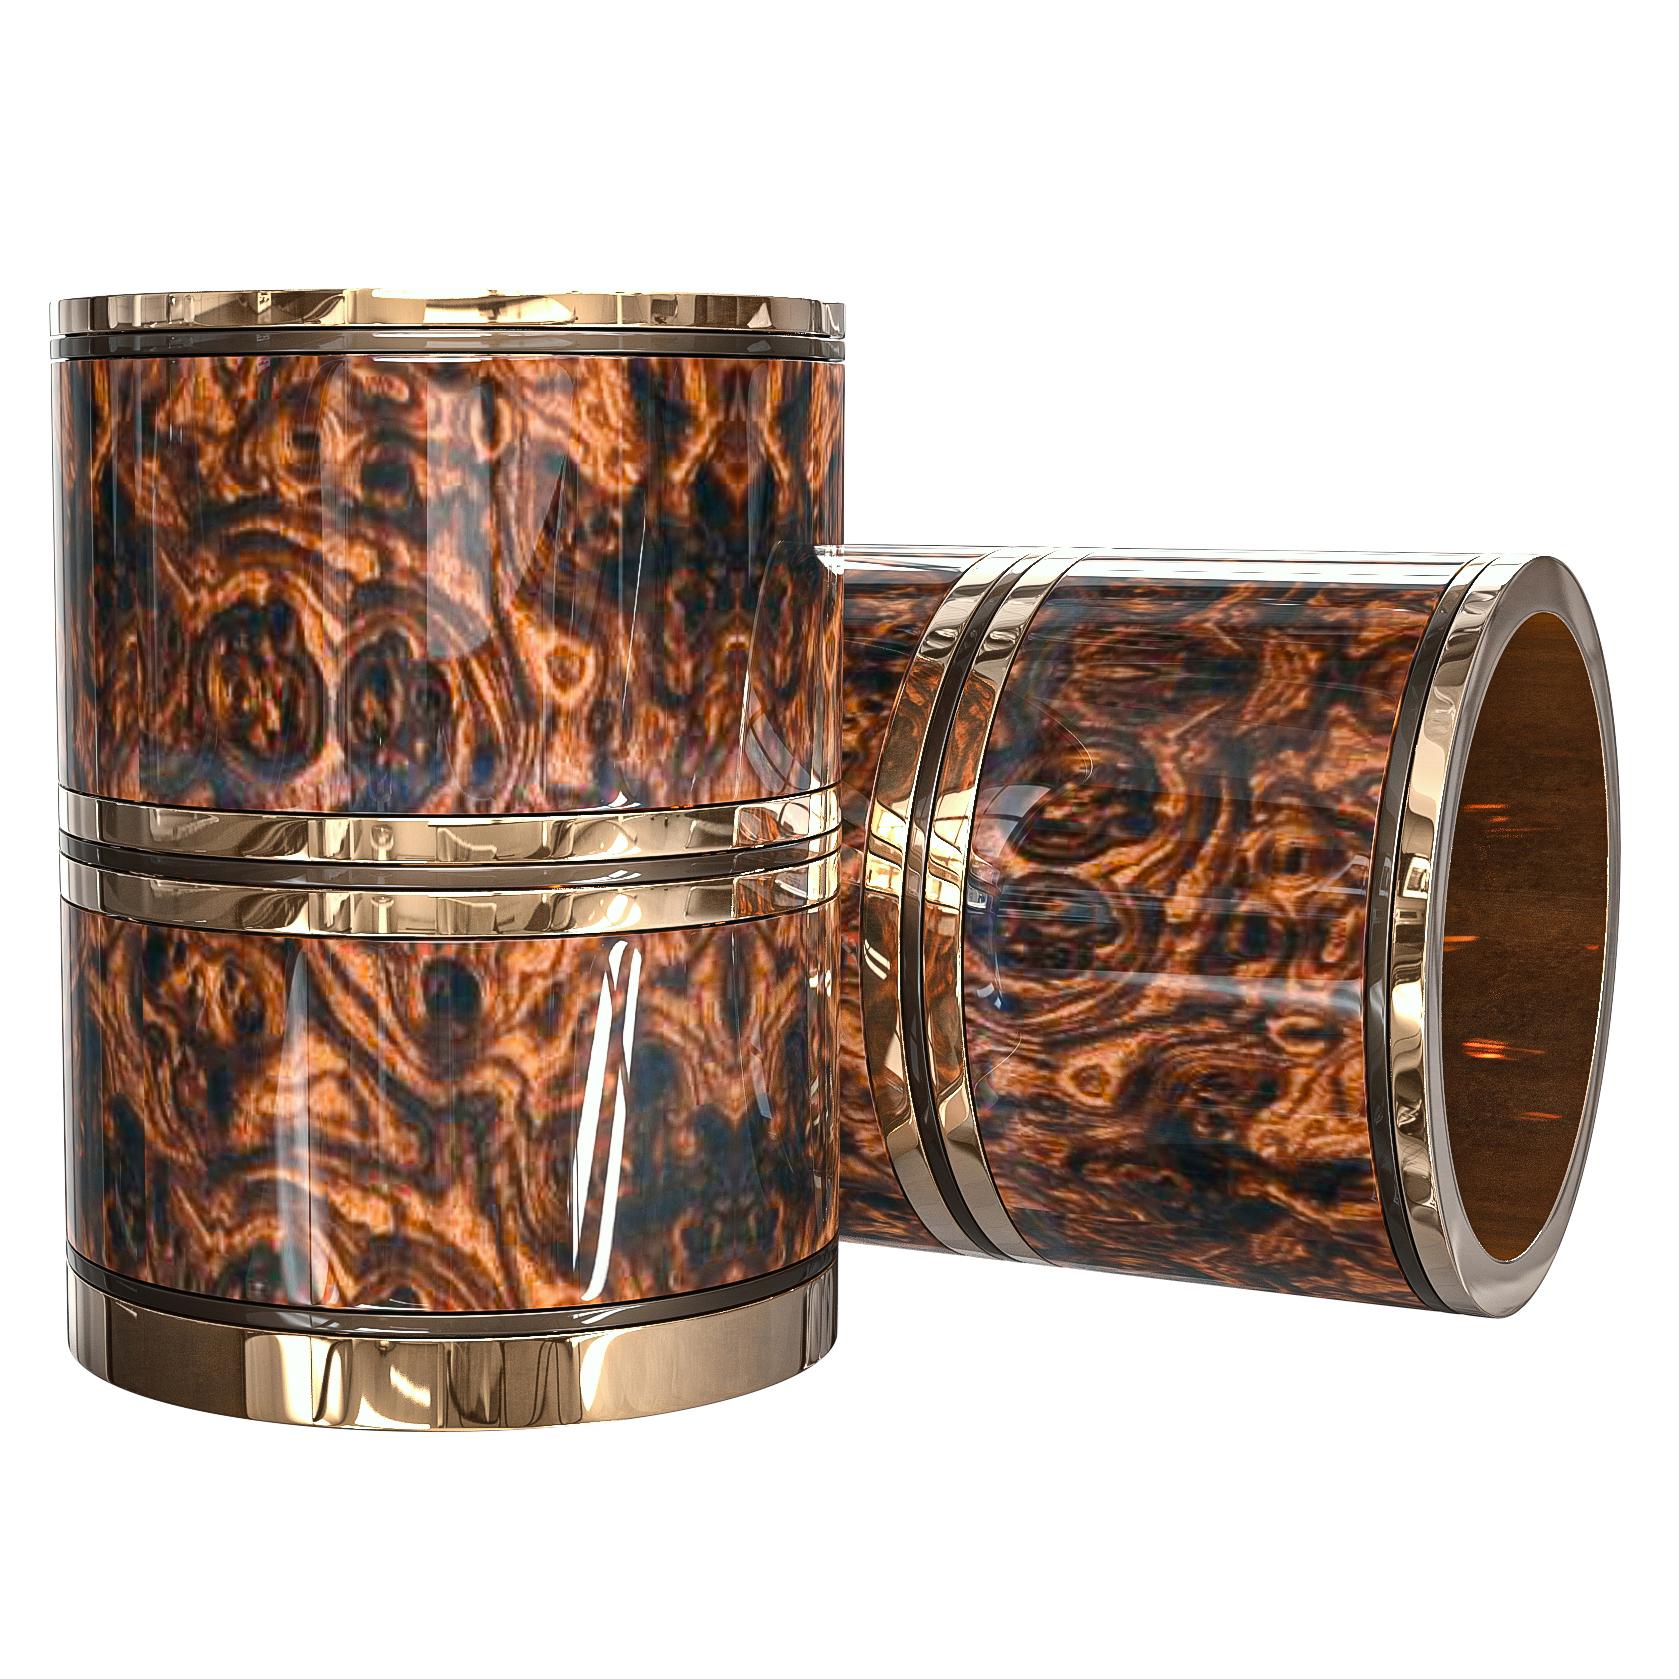 Melagrana ice bucket with special burl walnut with bronze, Istanbul.

Designed by Hasan Samet Bizimyer.
Design, Art, Innovation.
Bizimyer Furniture Presents.

Bizimyer Art / Design.

The world needs icons. Those exceptional few that stand clear of